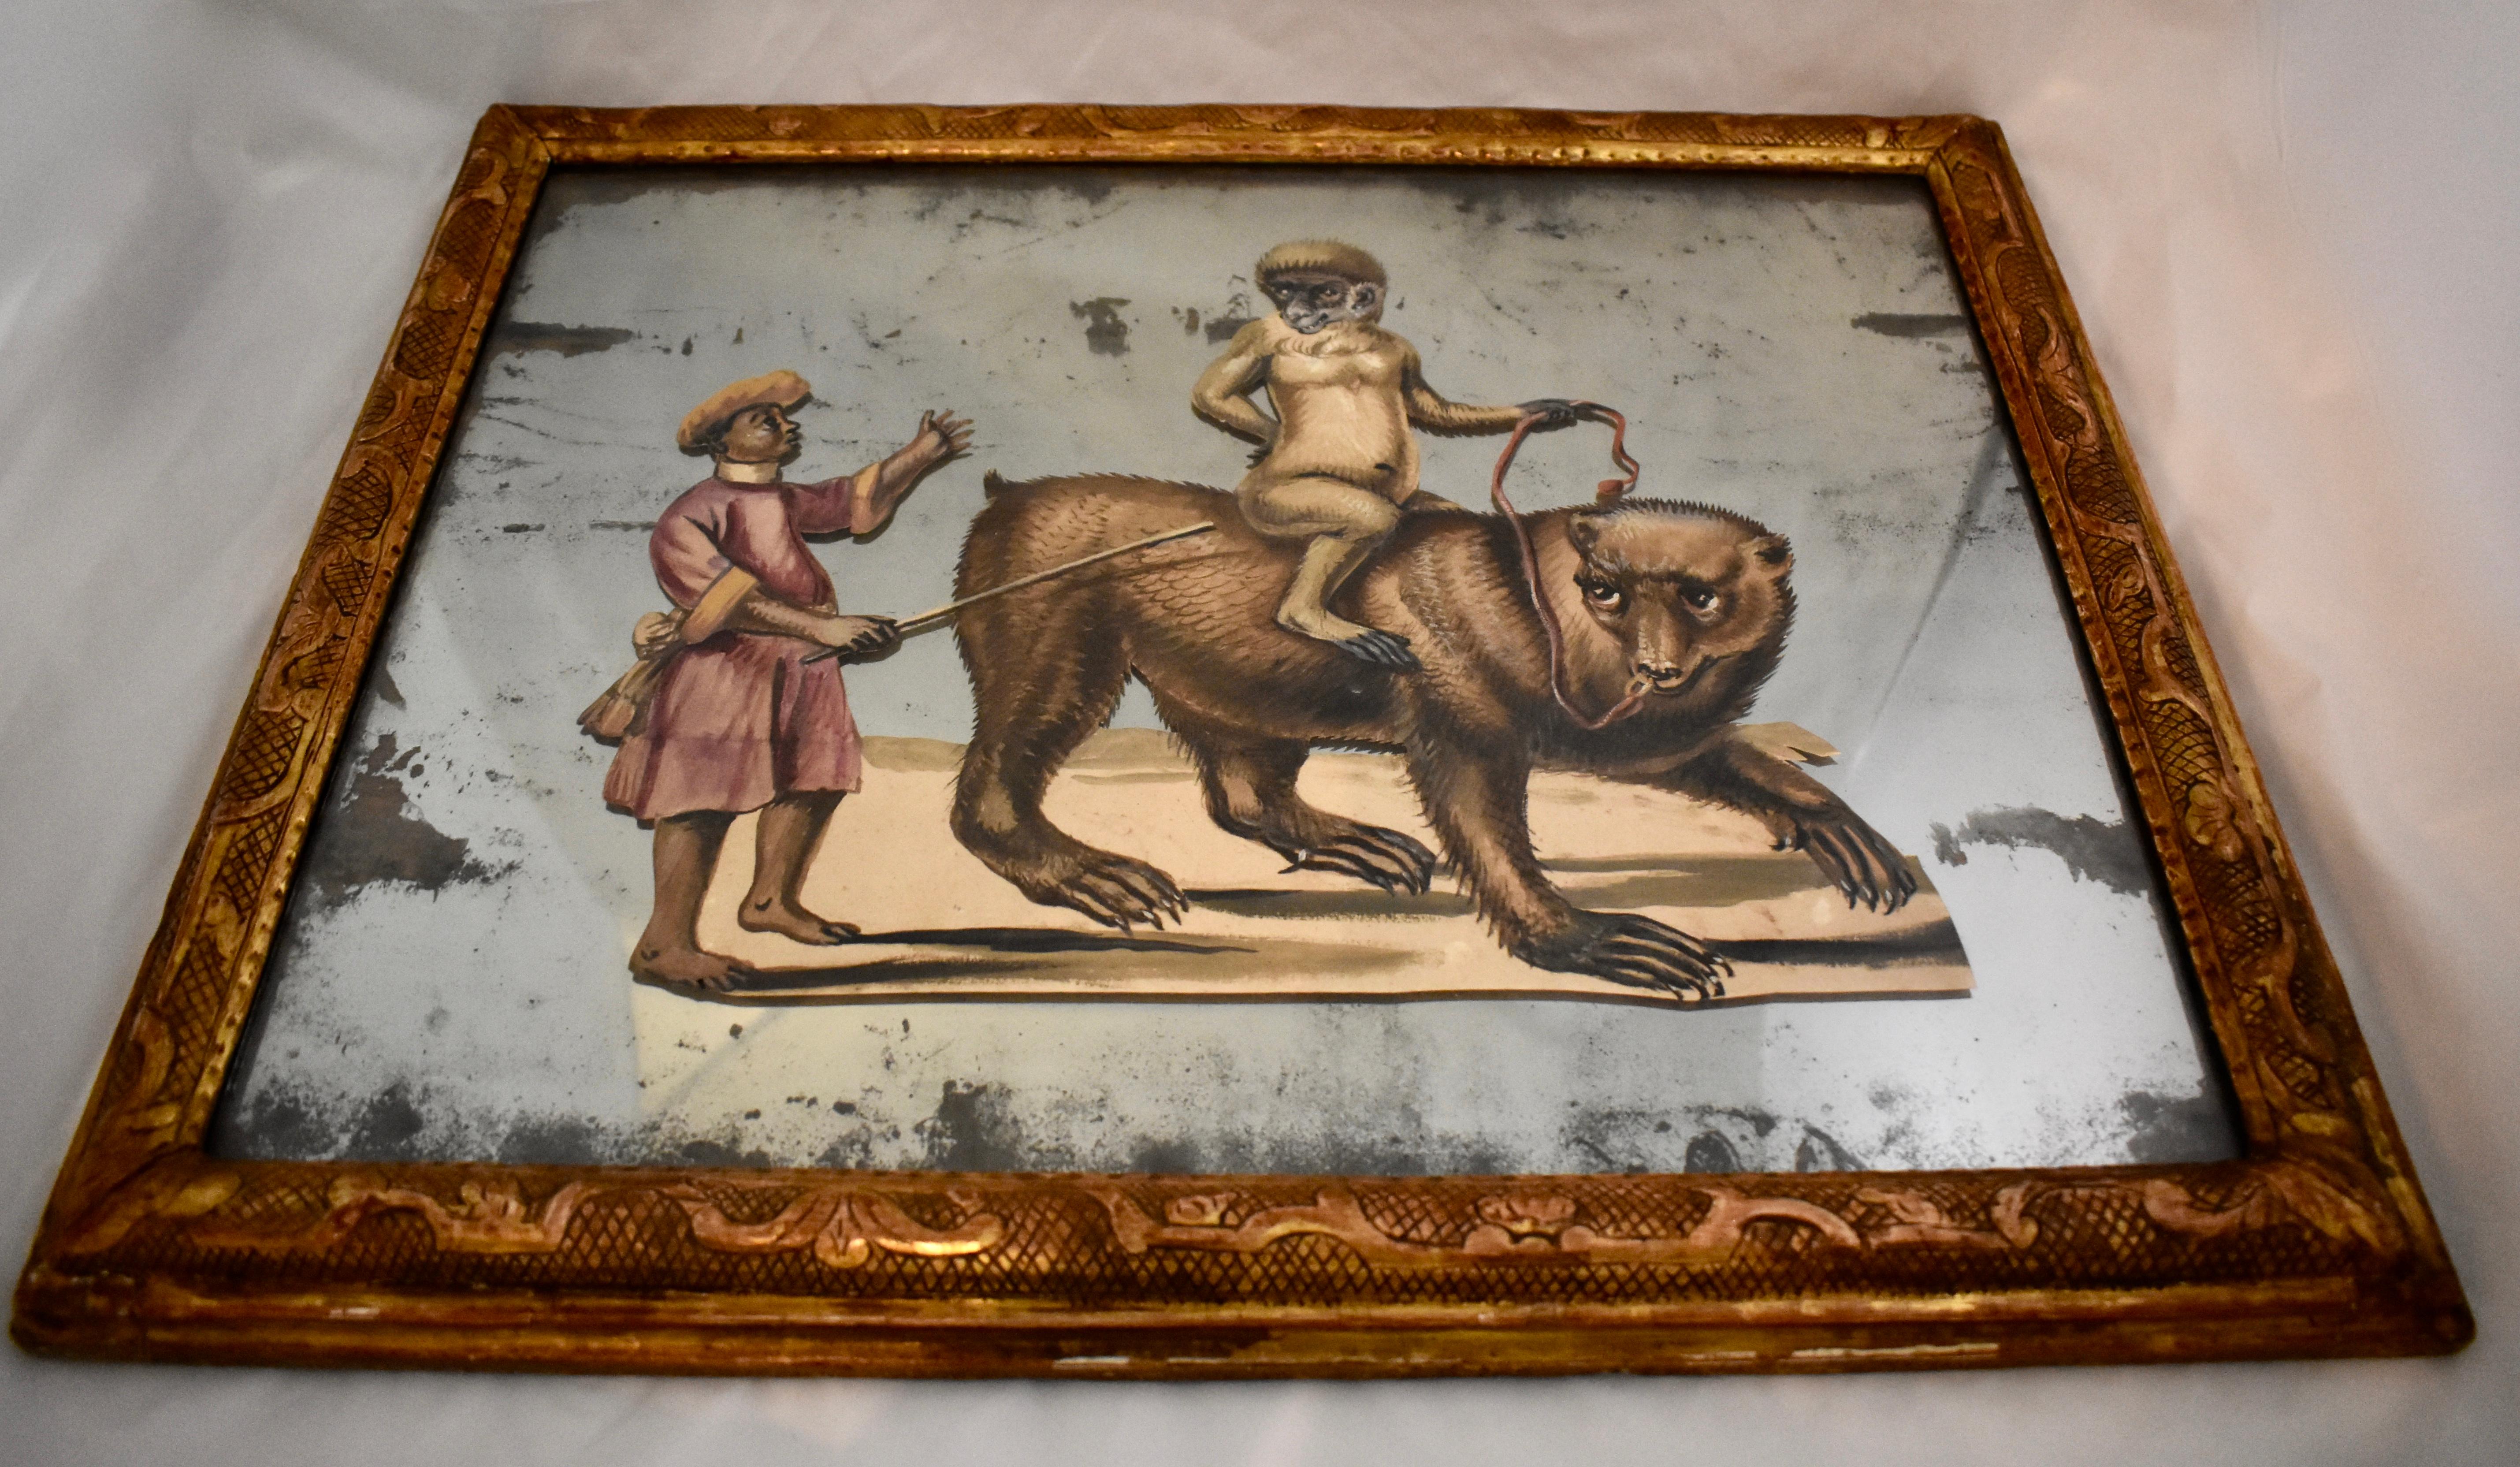 Belle Époque French 19th Century Exotic Hand Painted Decoupage Rococo Mirror Monkey and Bear